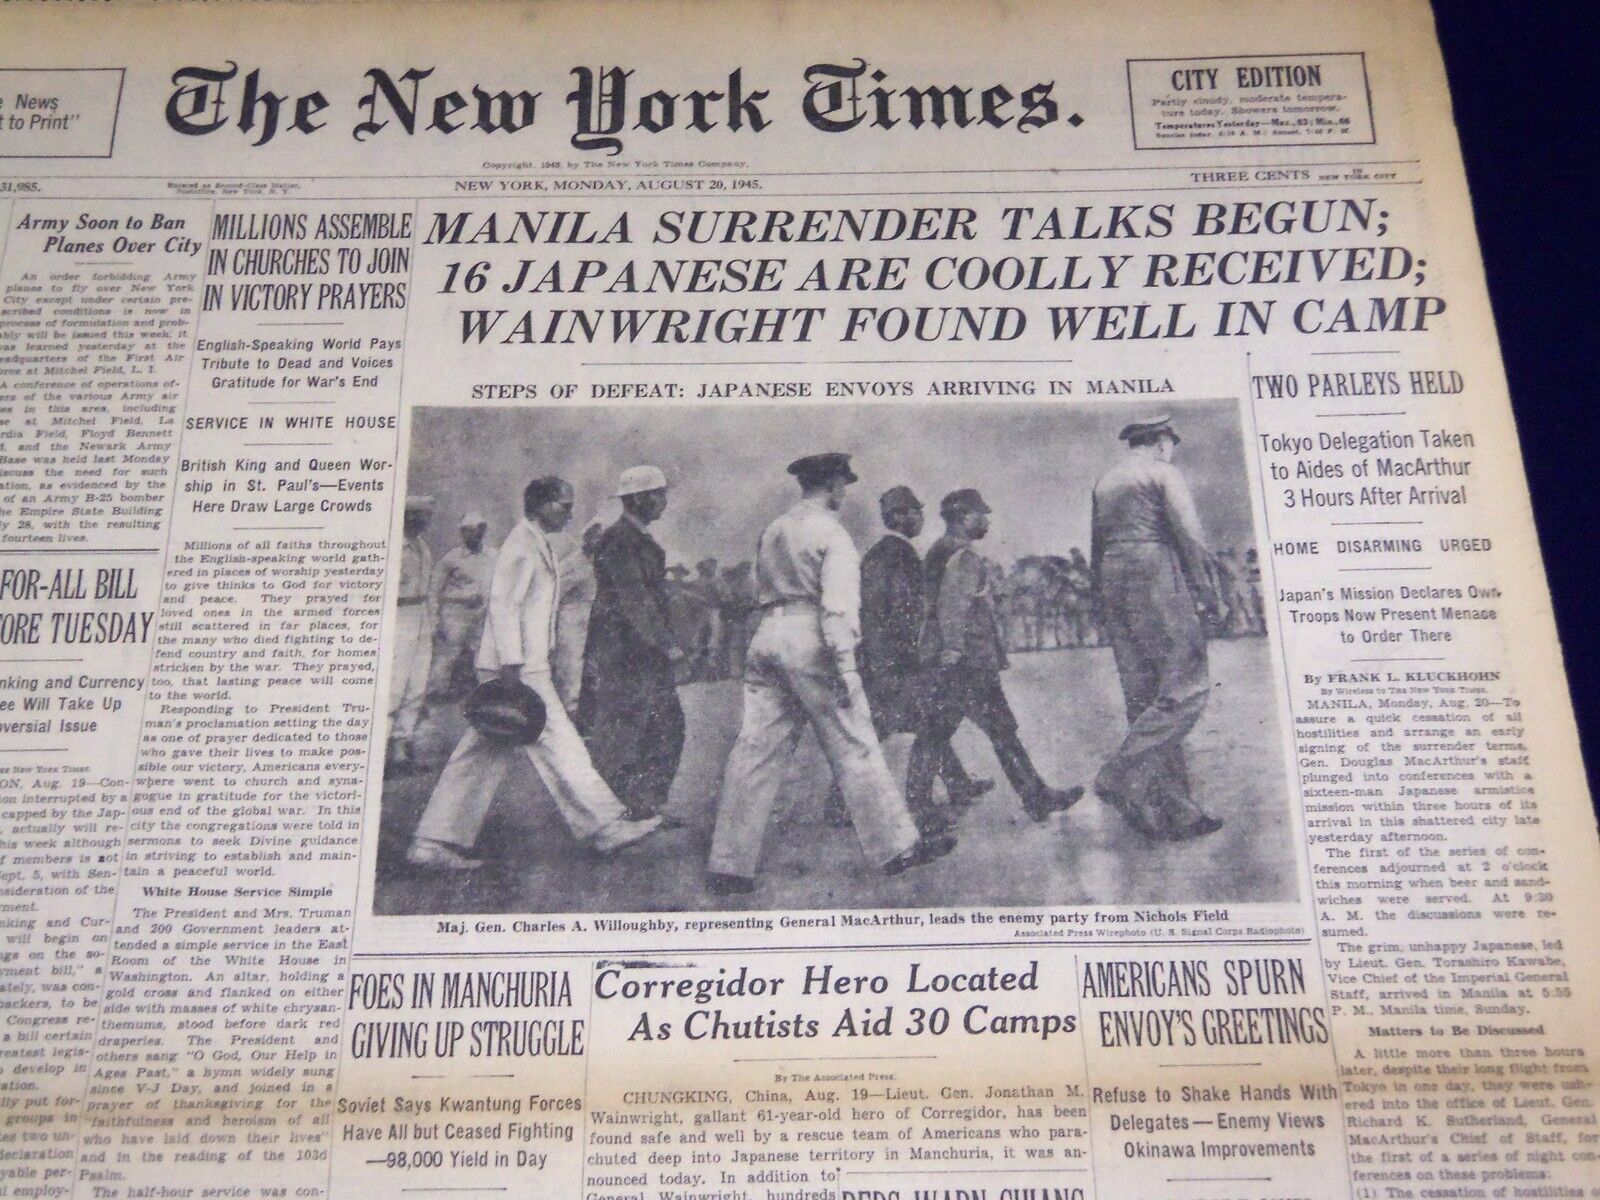 1945 AUGUST 20 NEW YORK TIMES - WAINWRIGHT FOUND WELL IN CAMP - NT 644